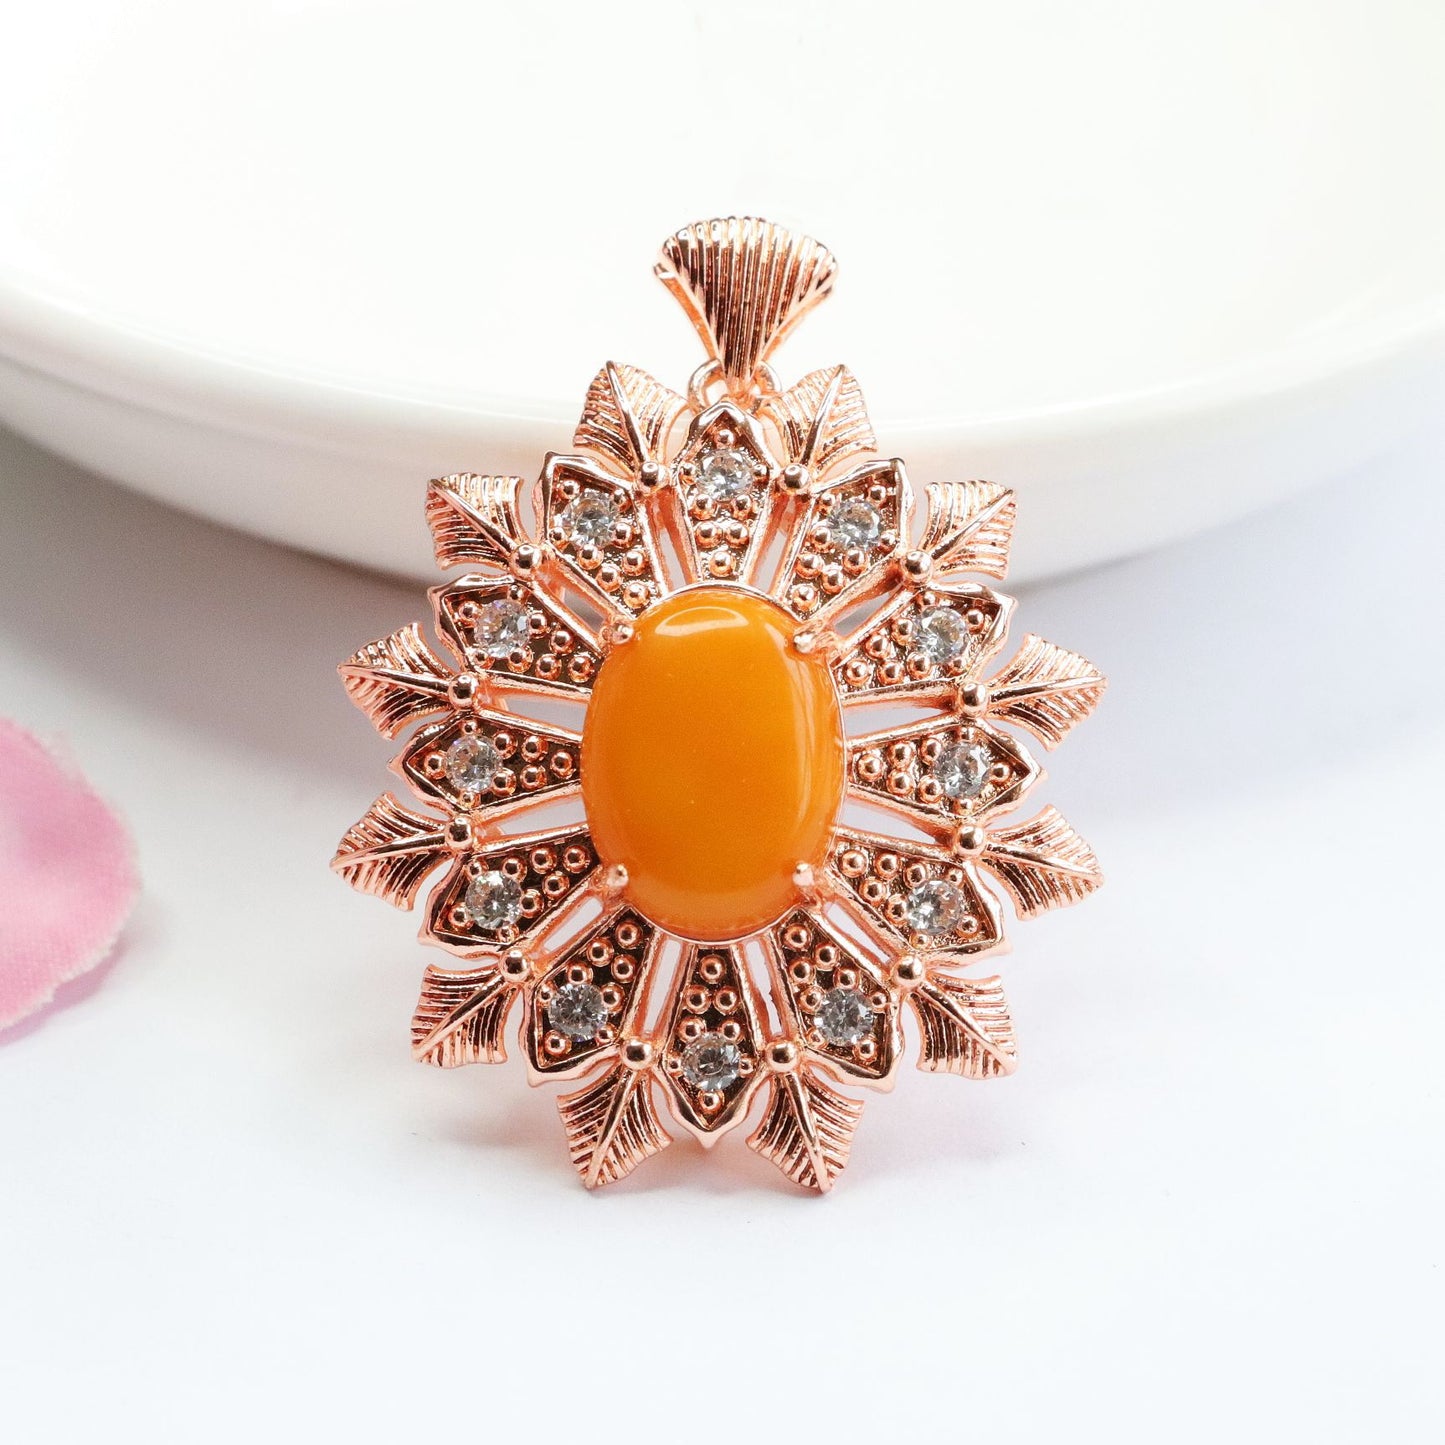 Natural Amber Snowflake Pendant with Beeswax and Zircon Accent Necklace